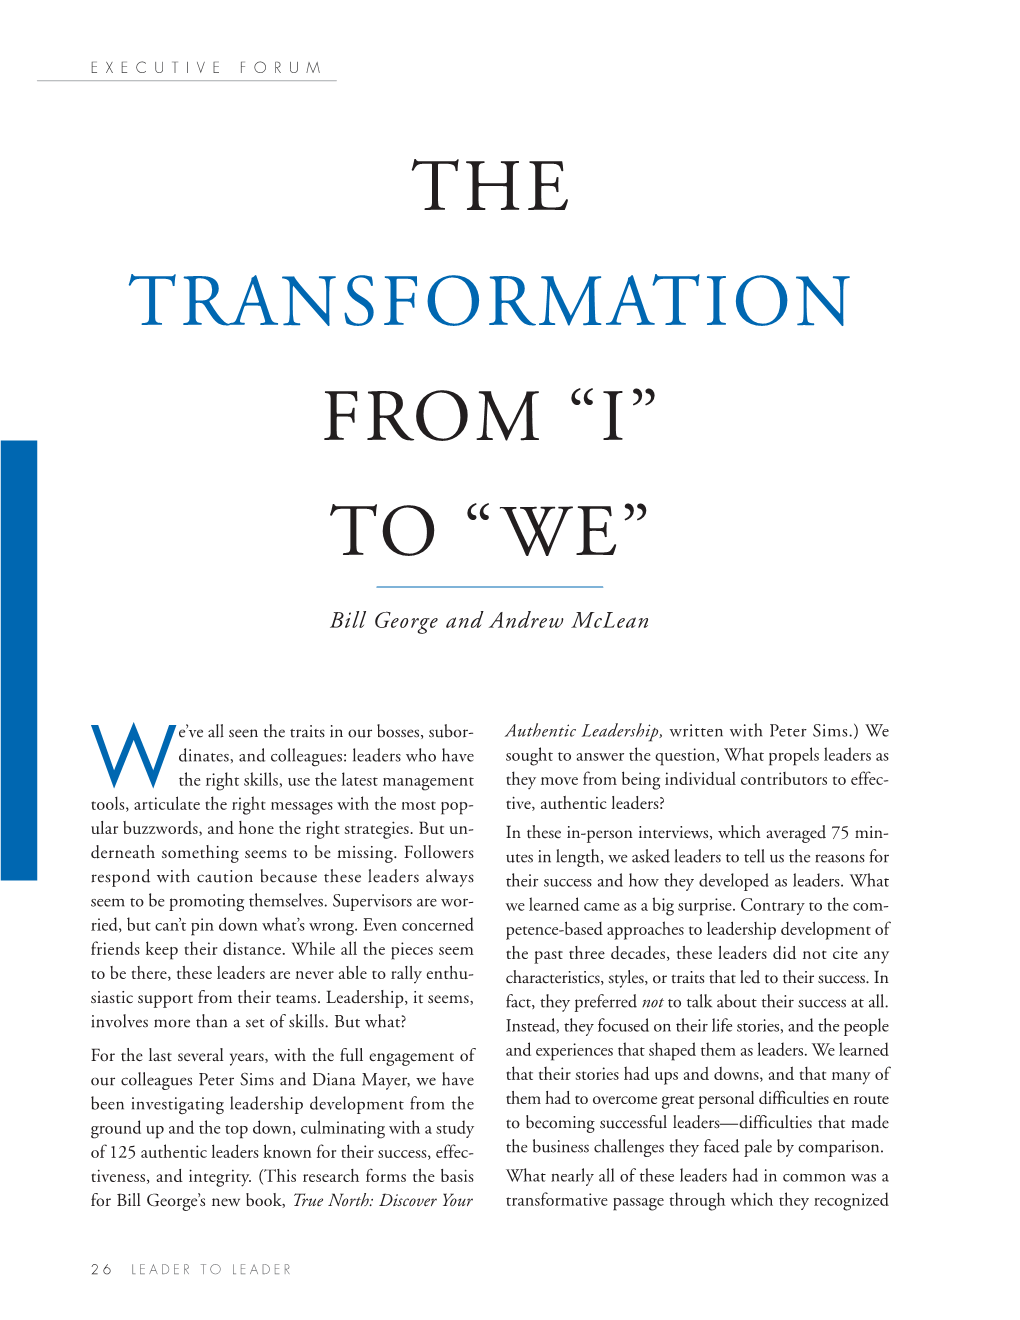 The Transformation from “I” to “We”